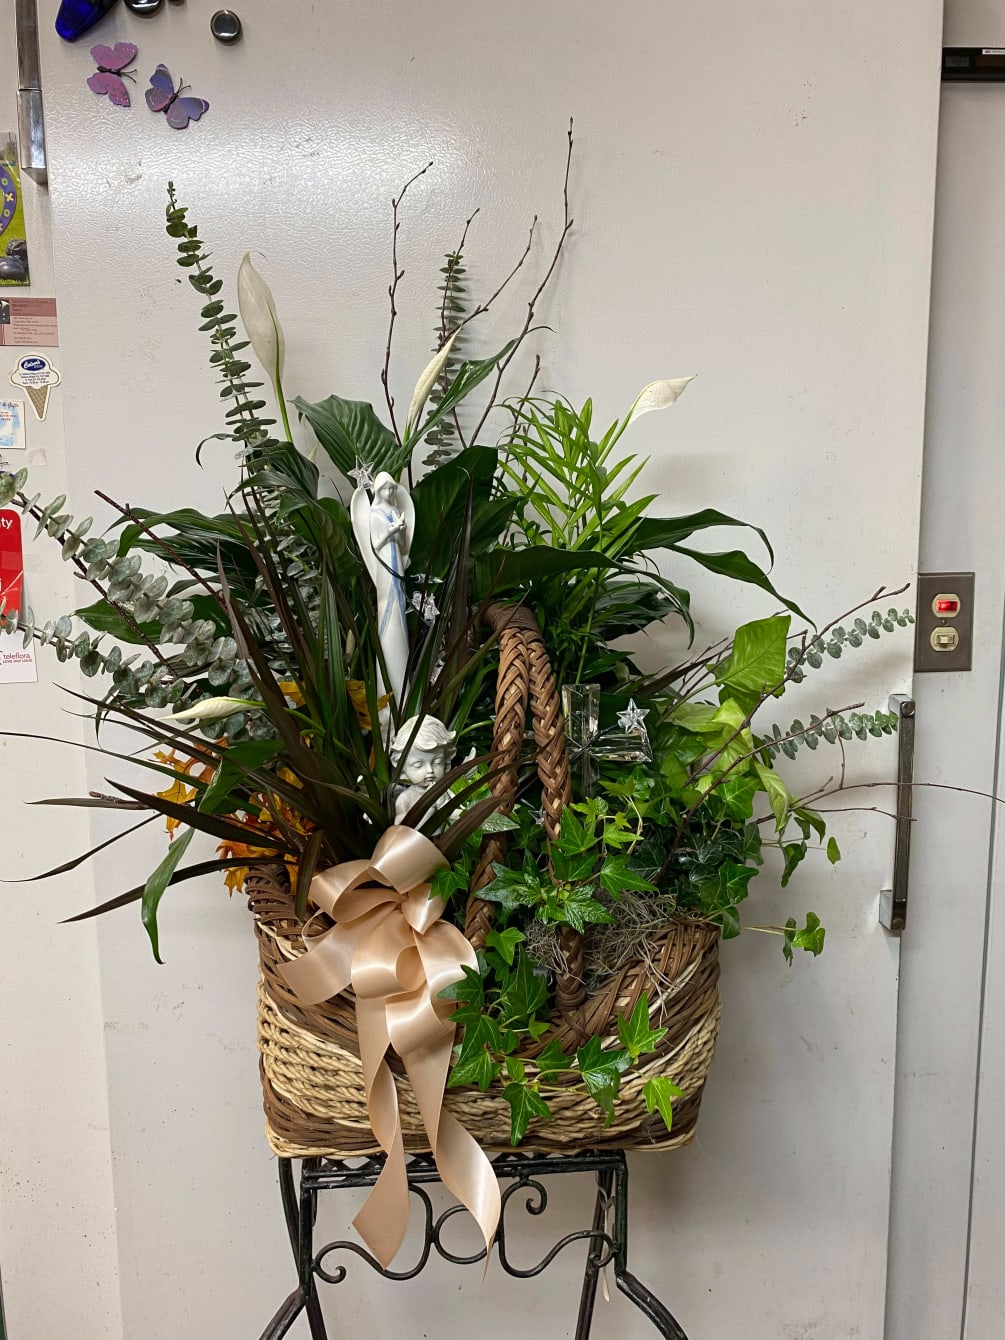 Assortment of green plants arranged in a basket.  This has a